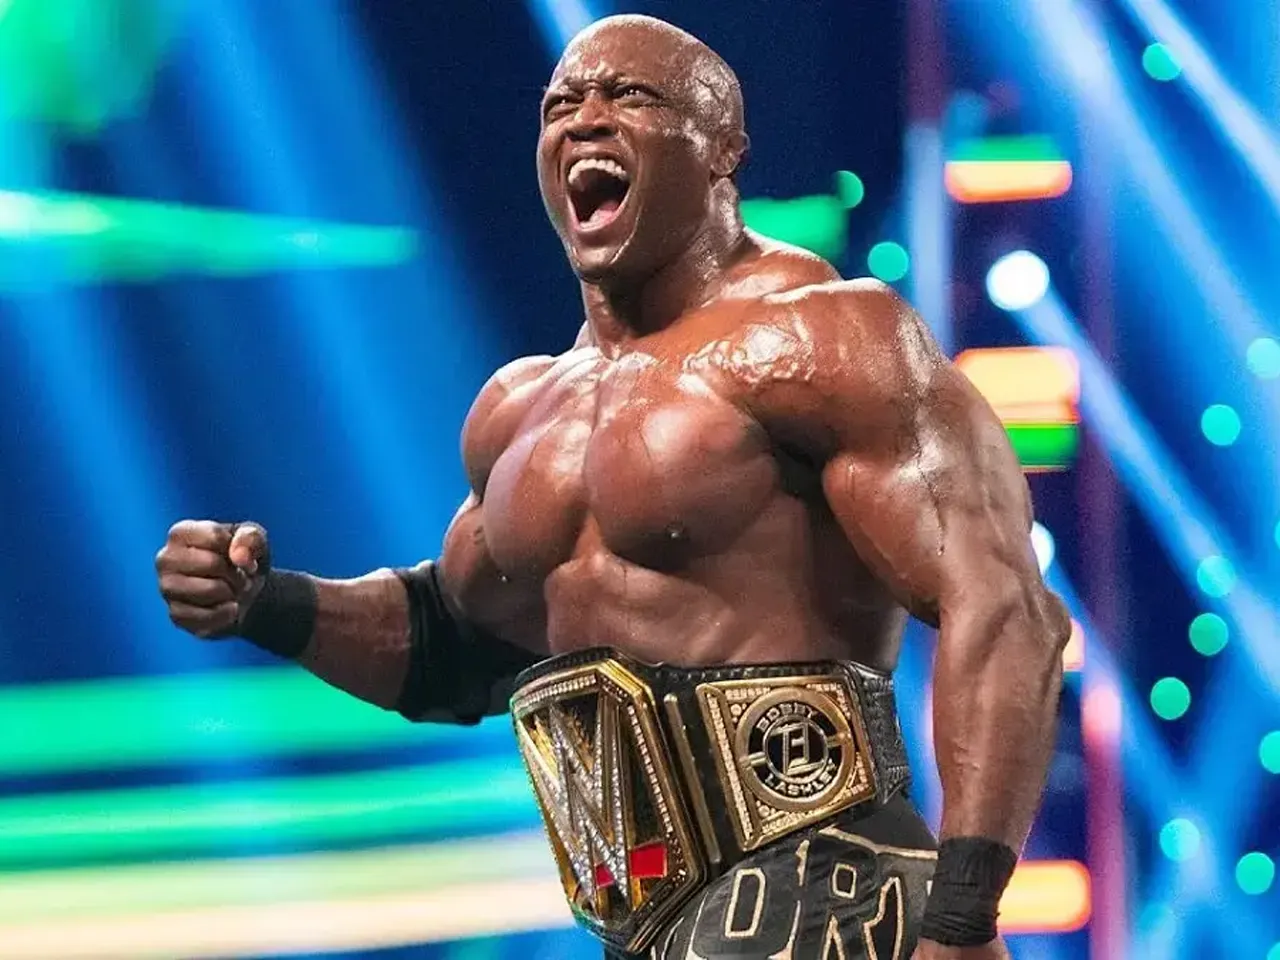 Bobby Lashley pulled from 'King of the Ring' tournament due to injury